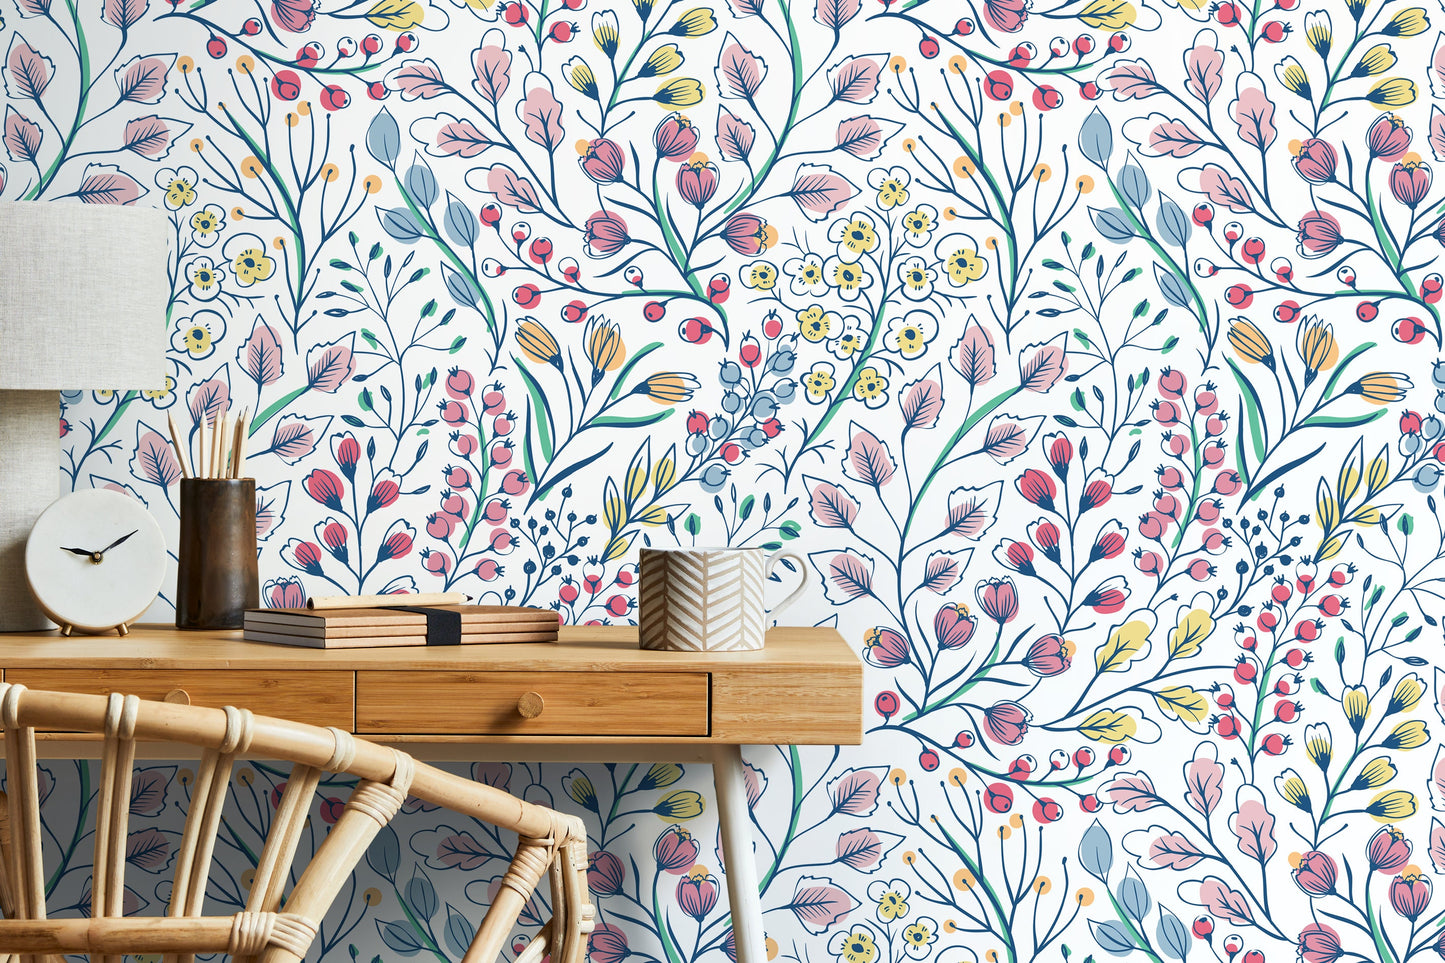 Colorful Wildflowers Wallpaper / Peel and Stick Wallpaper Removable Wallpaper Home Decor Wall Art Wall Decor Room Decor - D146